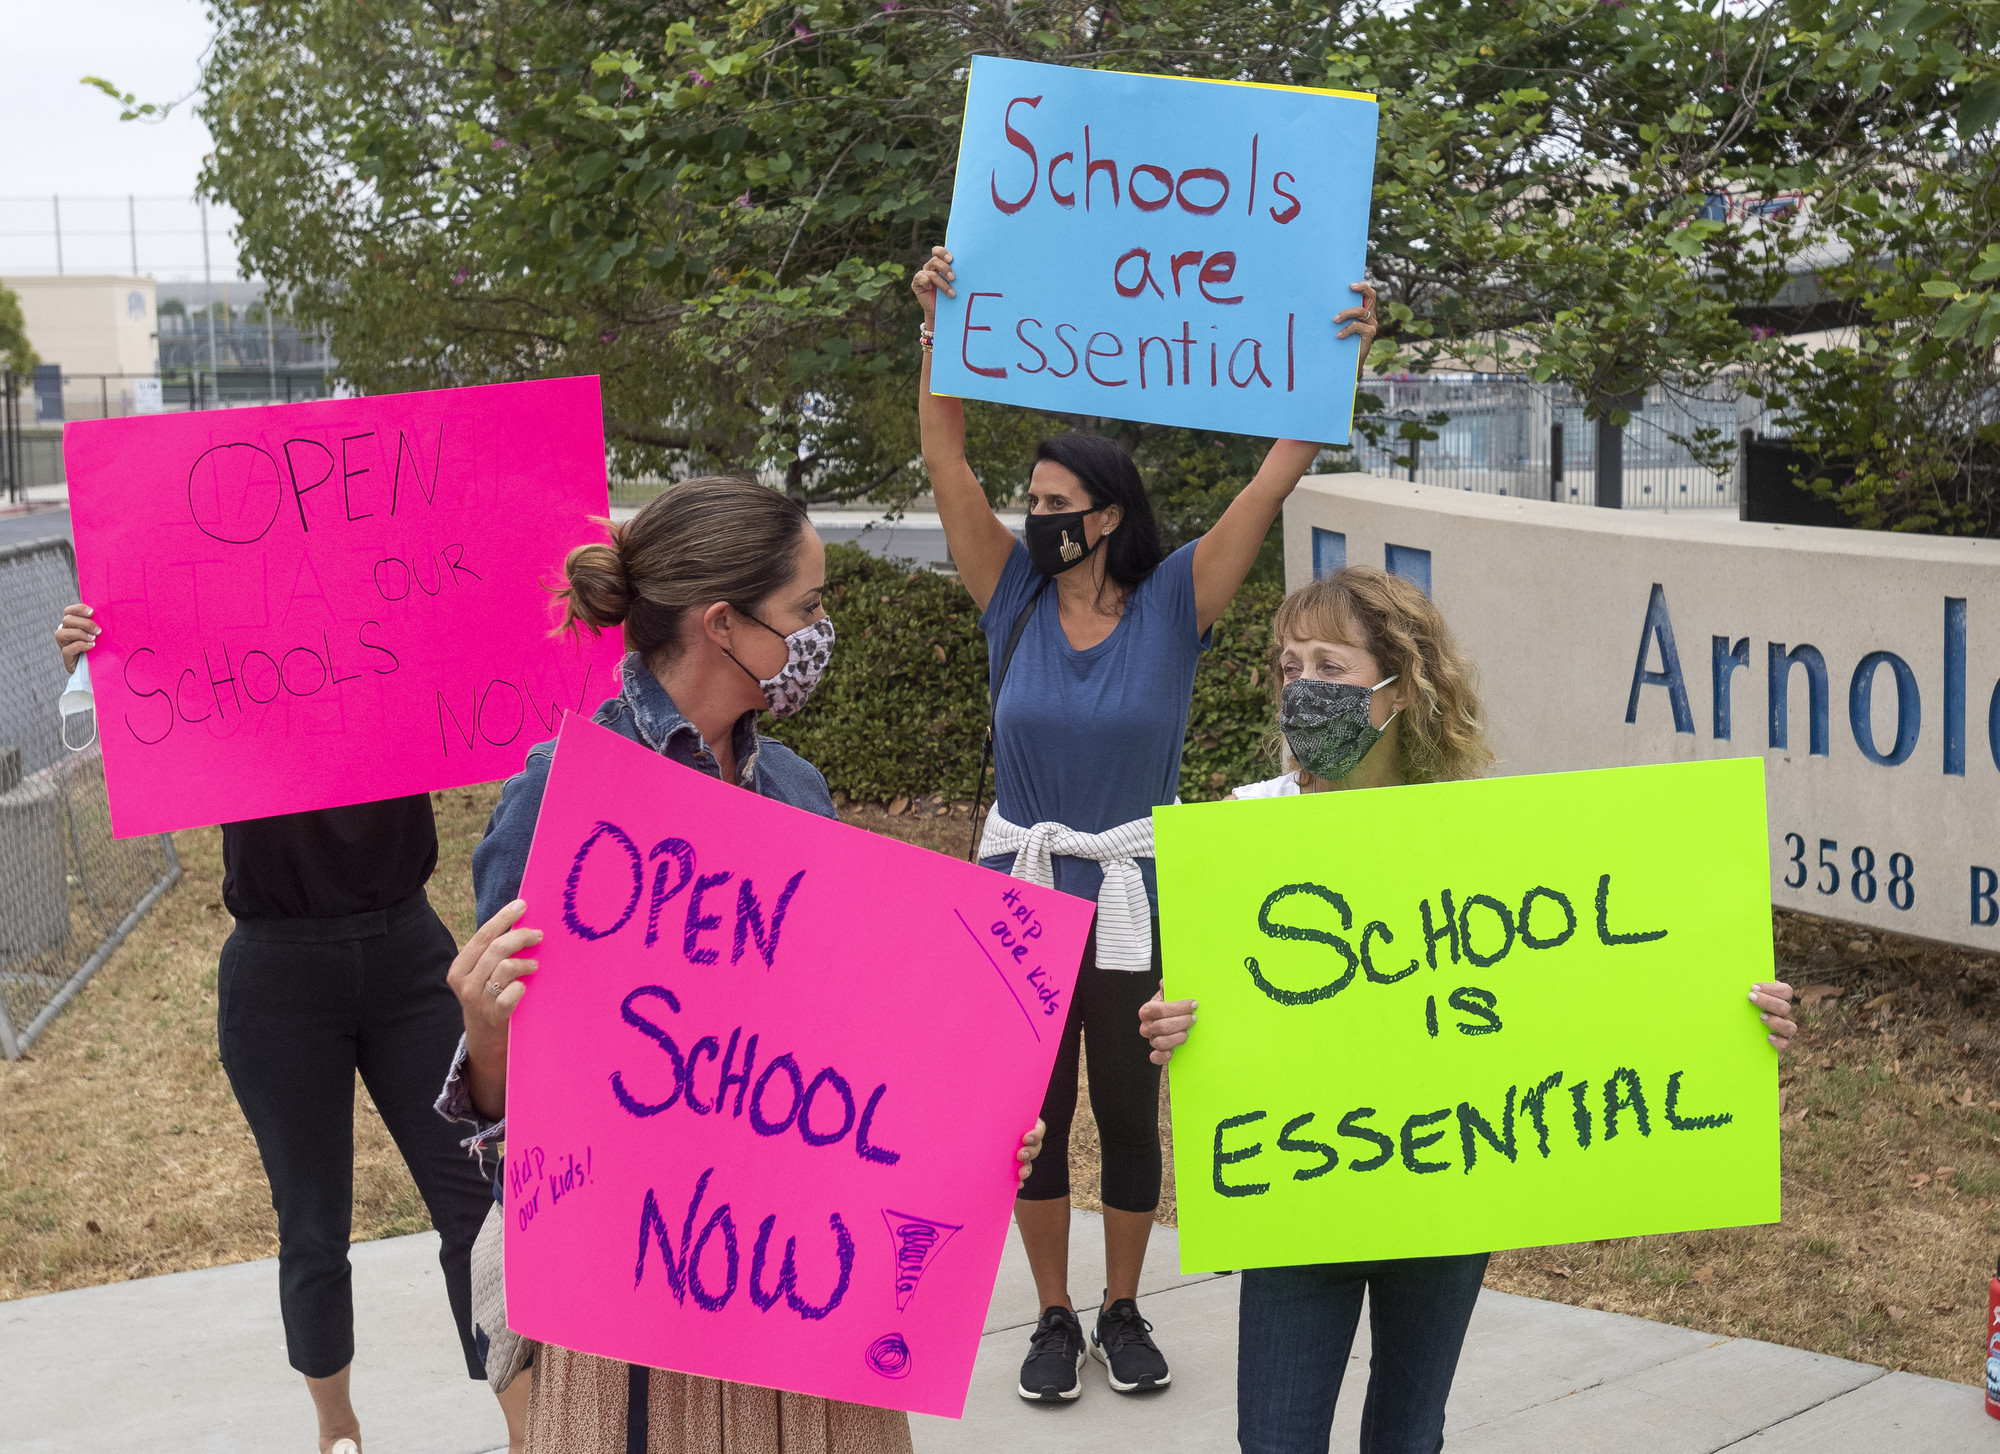 Protesters rally for schools to be reopened for full, in-person instruction outside Beckman High School in Irvine, Calif., on Sept. 8, 2020. (Paul Bersebach—Orange County Register/Getty Images)